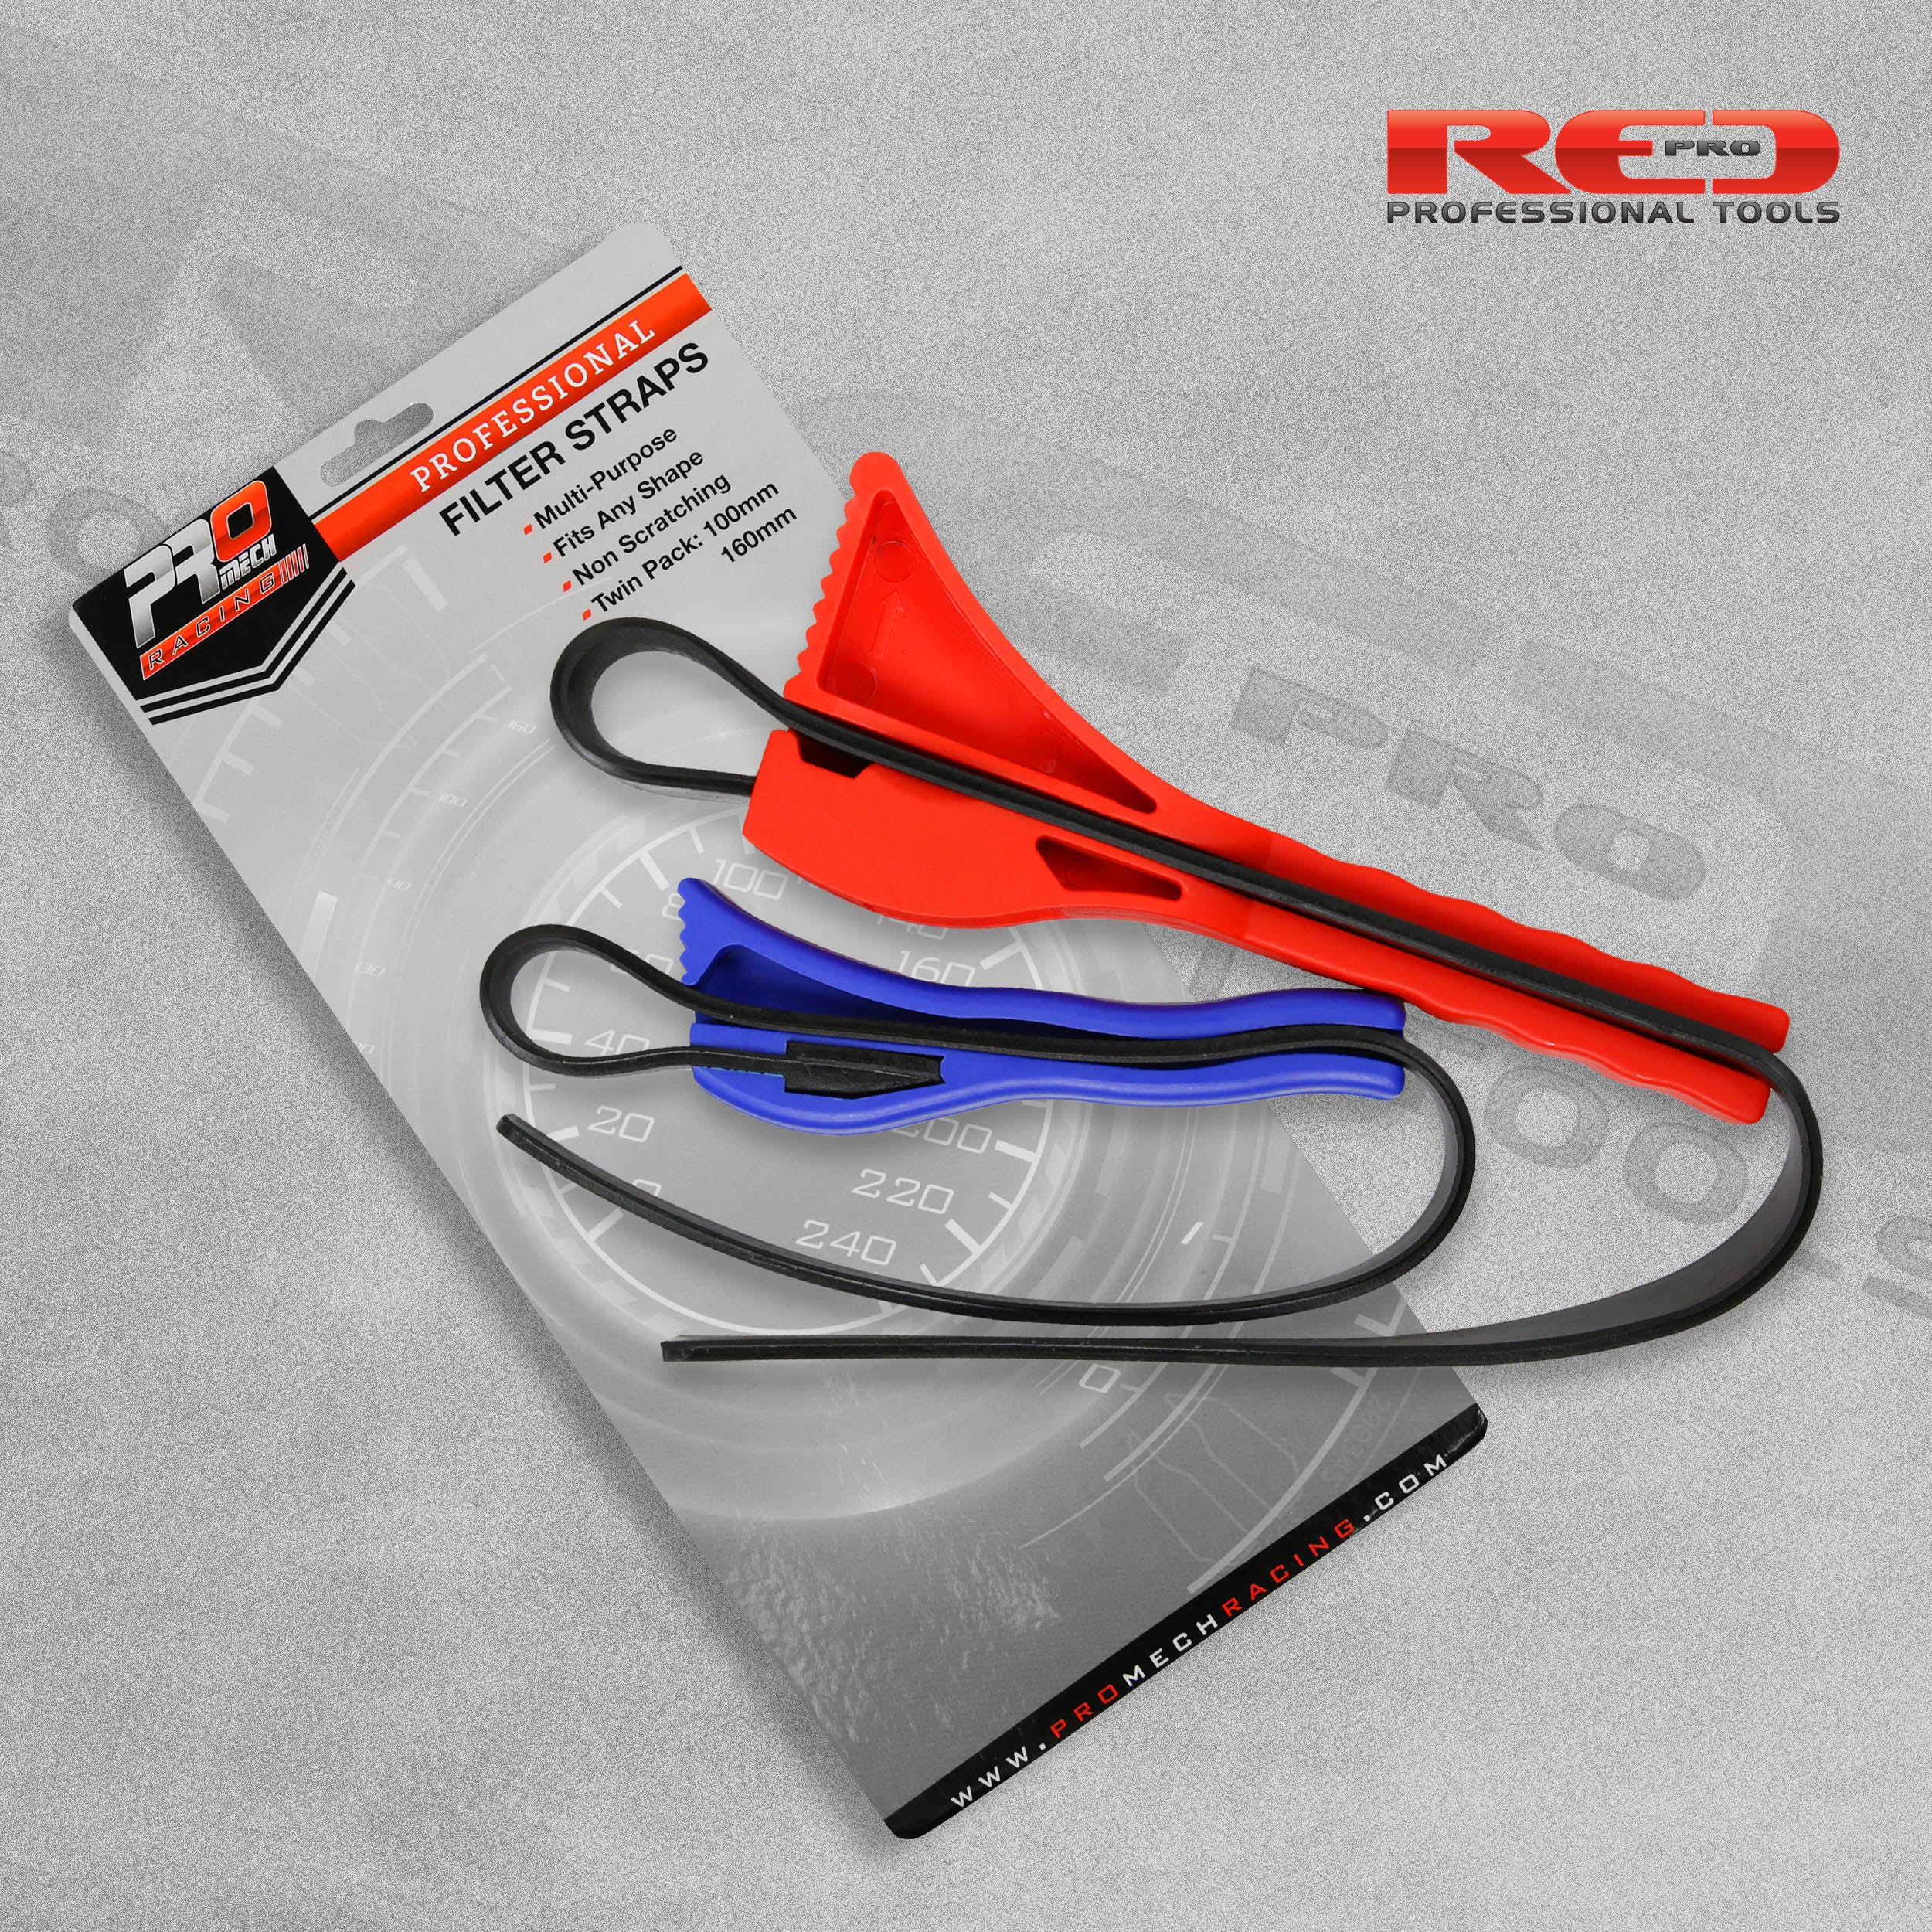 Pro Mech Professional Filter Straps -twin pack